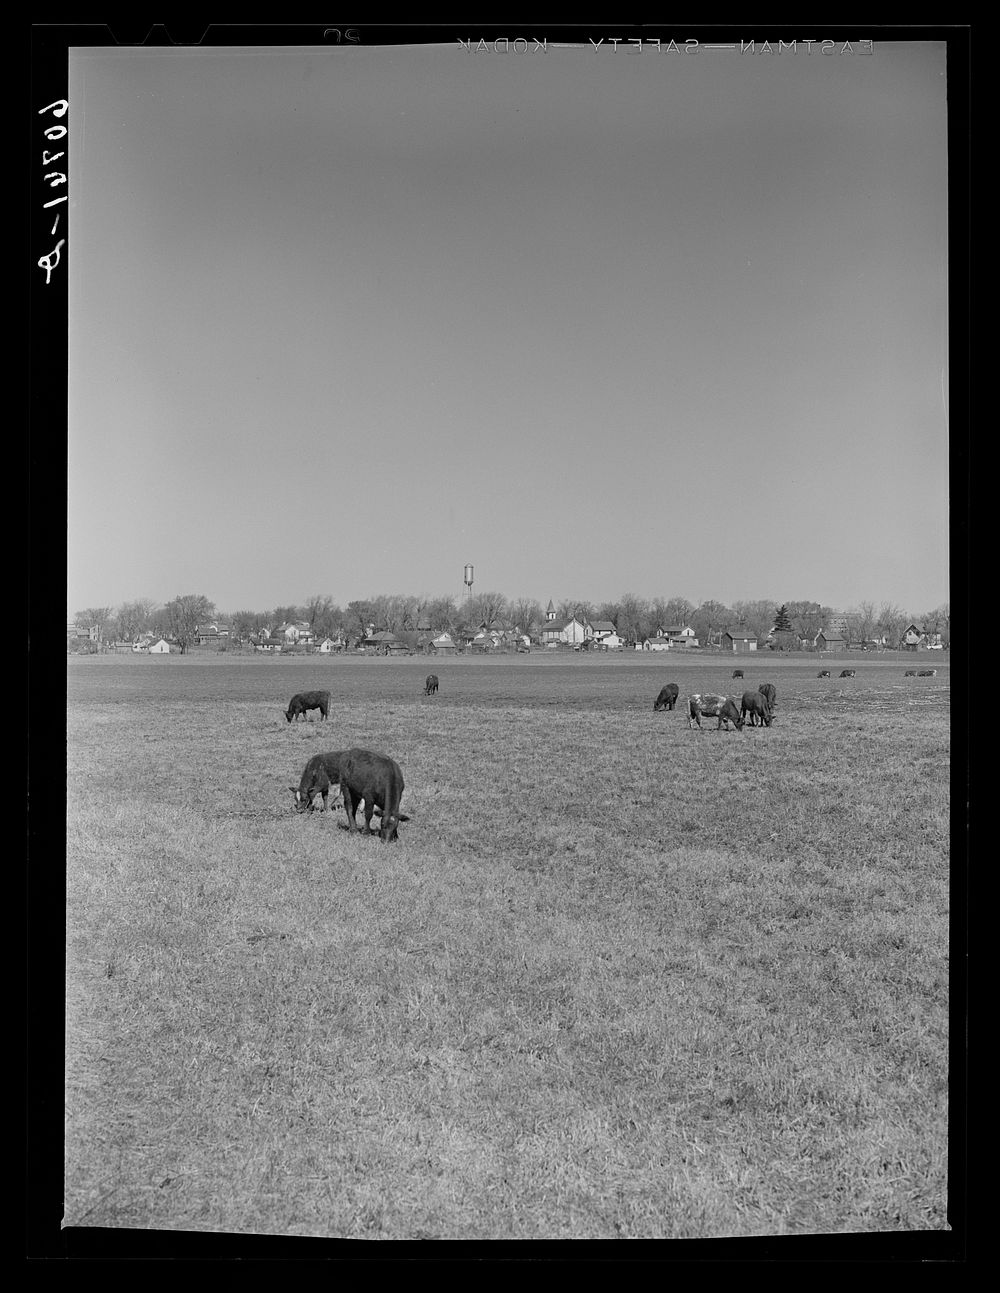 Cattle grazing in field on outskirts of town. Greene County, Iowa. Sourced from the Library of Congress.